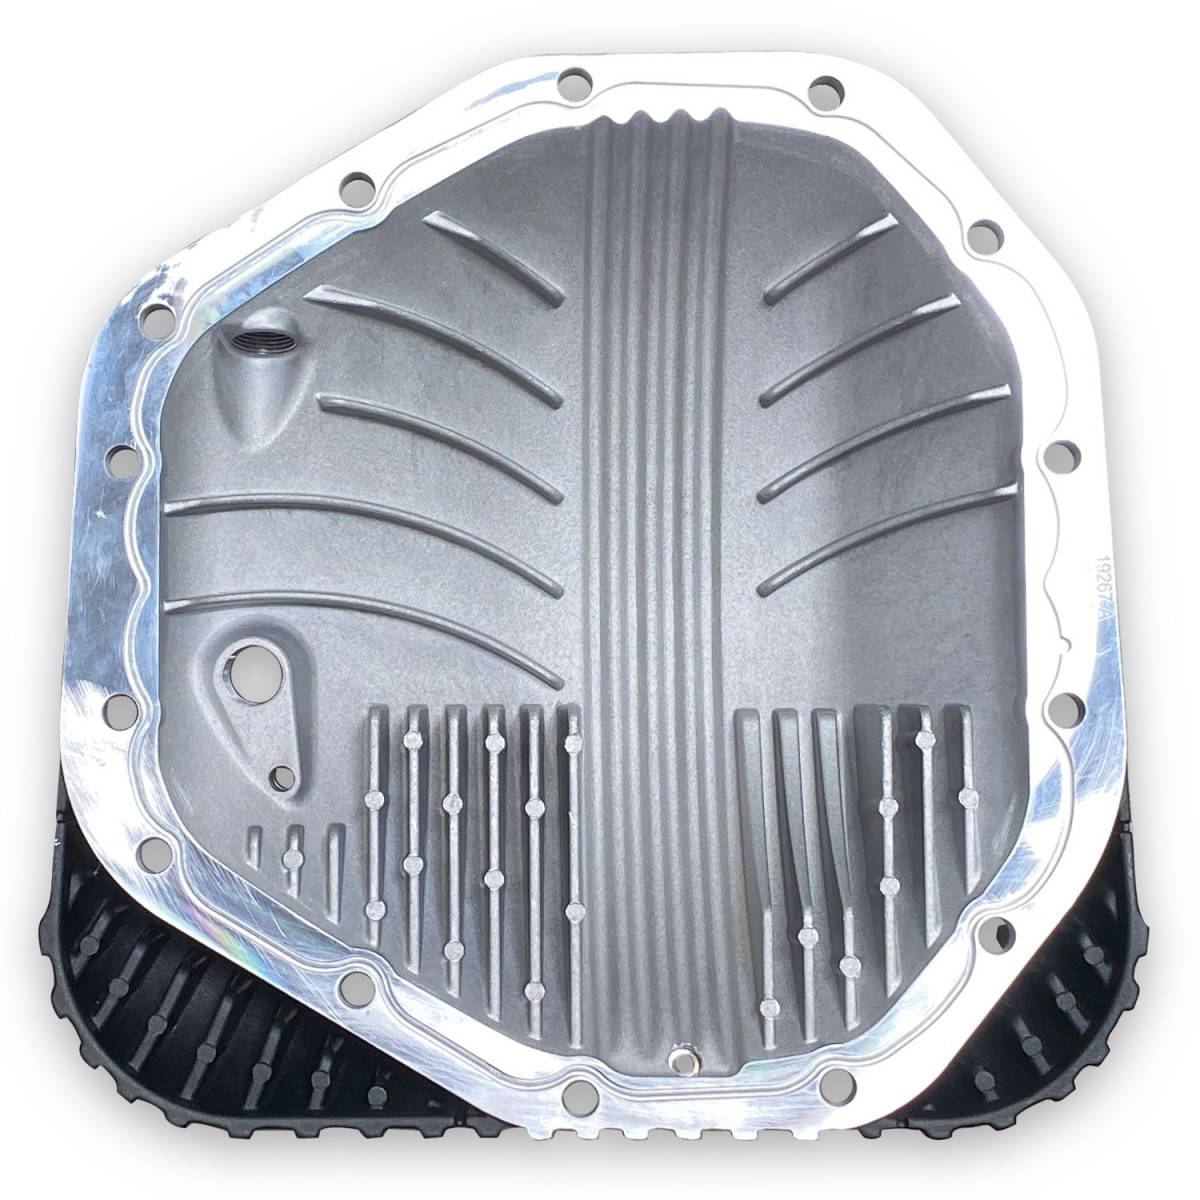 Inside view of the Ram-Air Differential Cover for the Dana M275